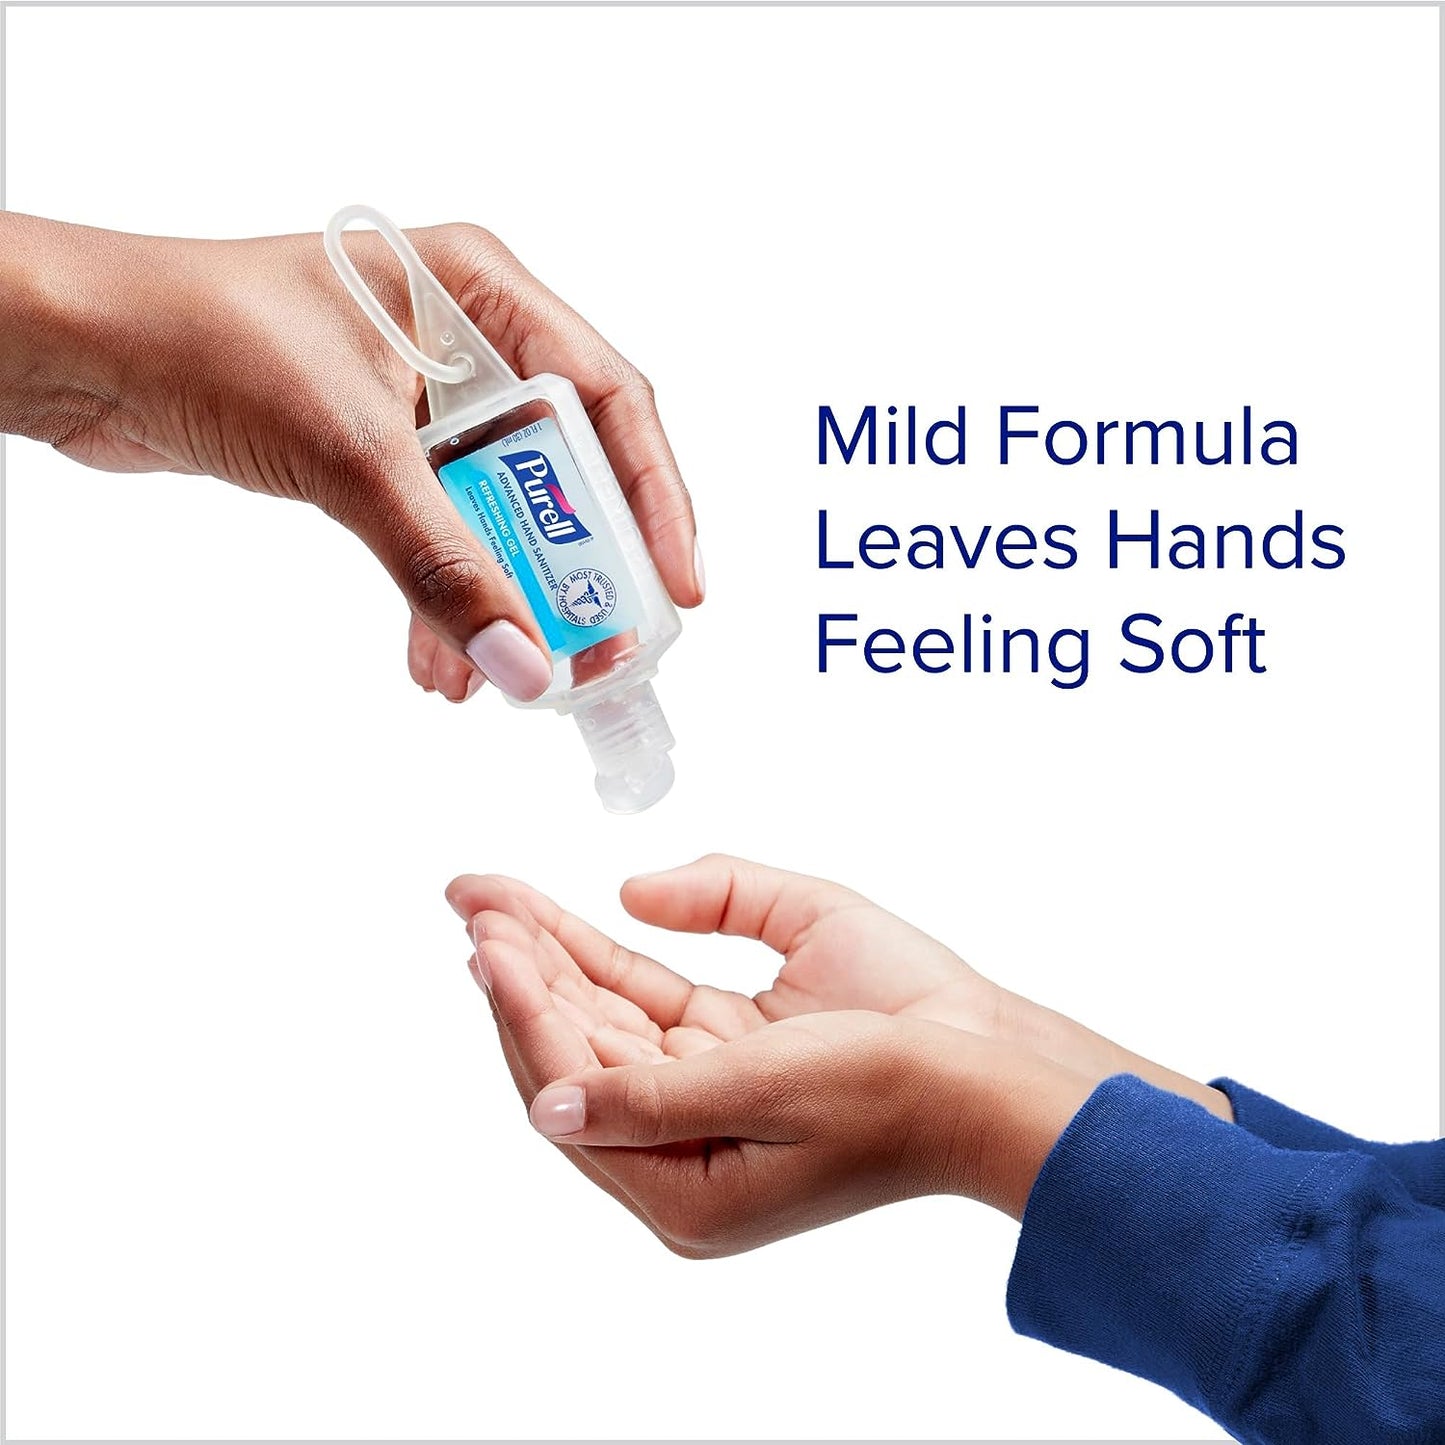 Purell Advanced Hand Sanitizer Variety Pack, Naturals and Refreshing Gel, 1 Fl Oz Travel Size Flip-Cap Bottle with Jelly Wrap Carrier (Pack of 8)